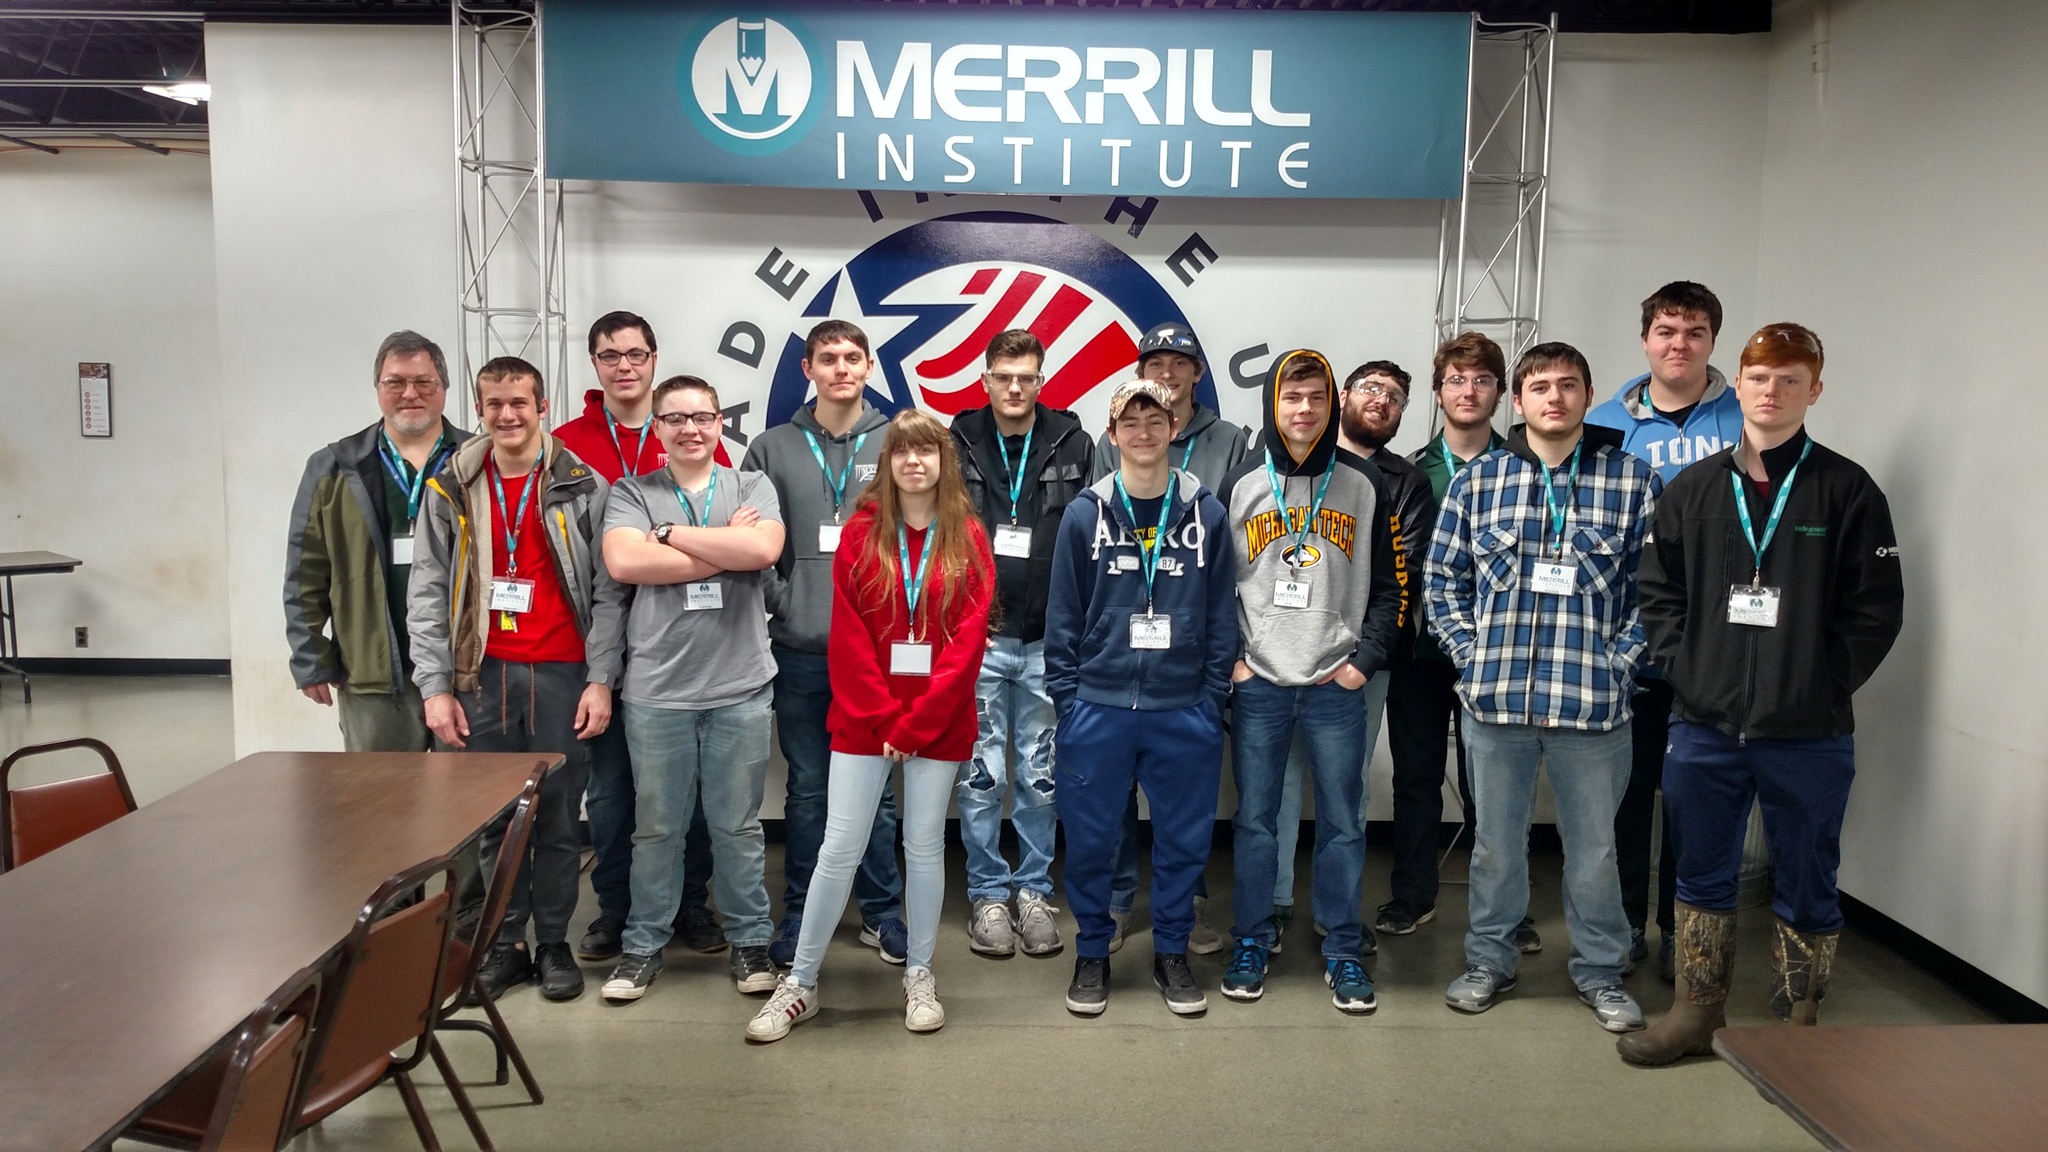 Students on a field trip to Merrill Institute.